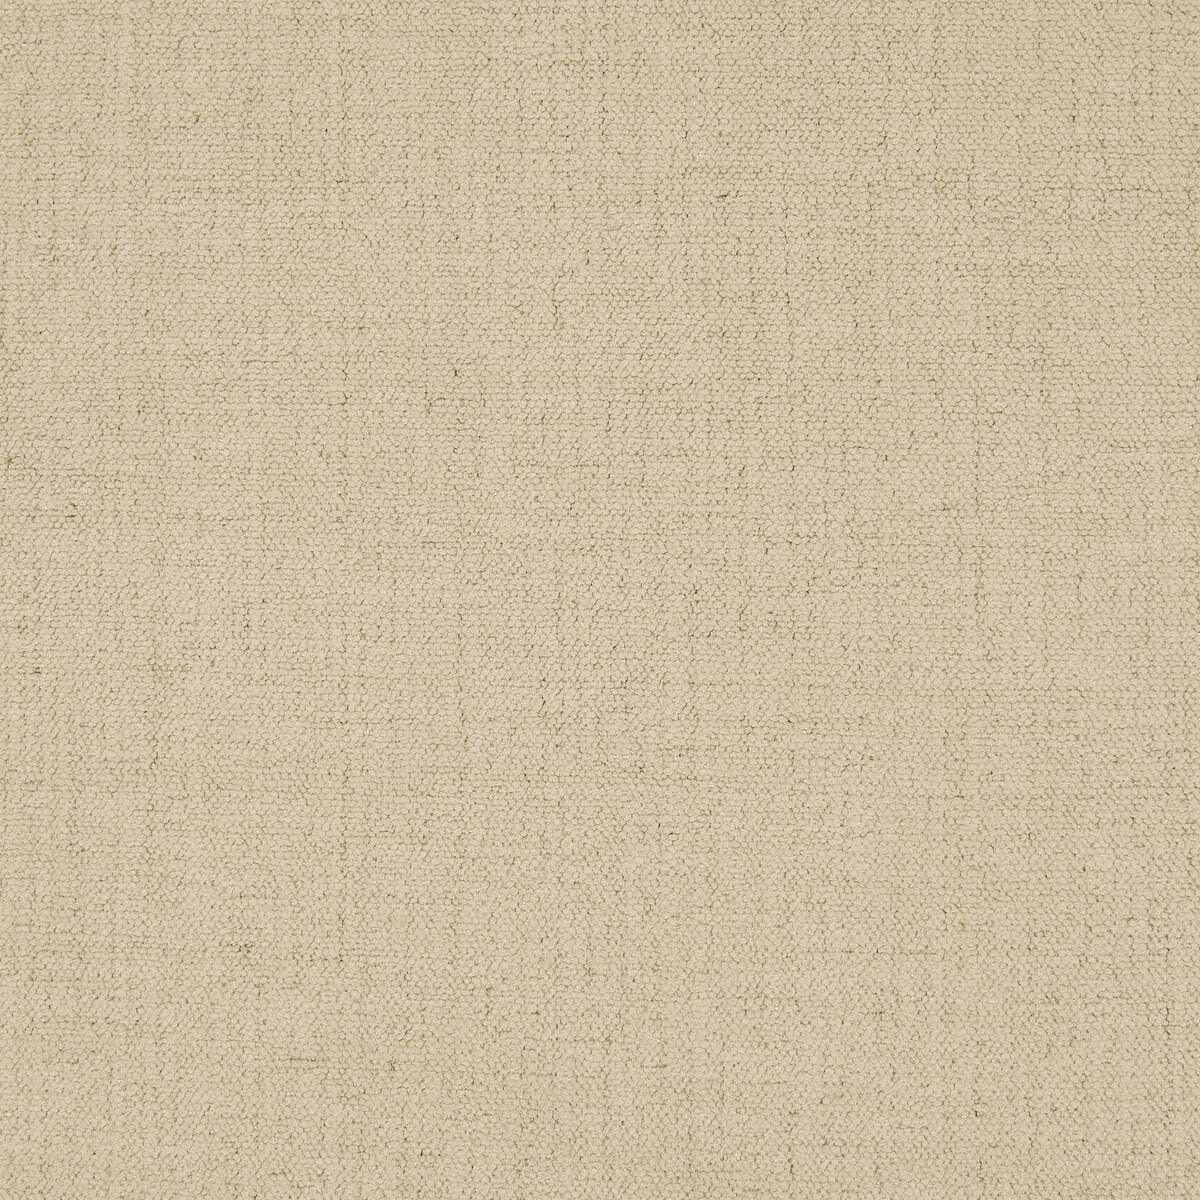 Materica fabric in 16 color - pattern LZ-30412.16.0 - by Kravet Couture in the Lizzo collection